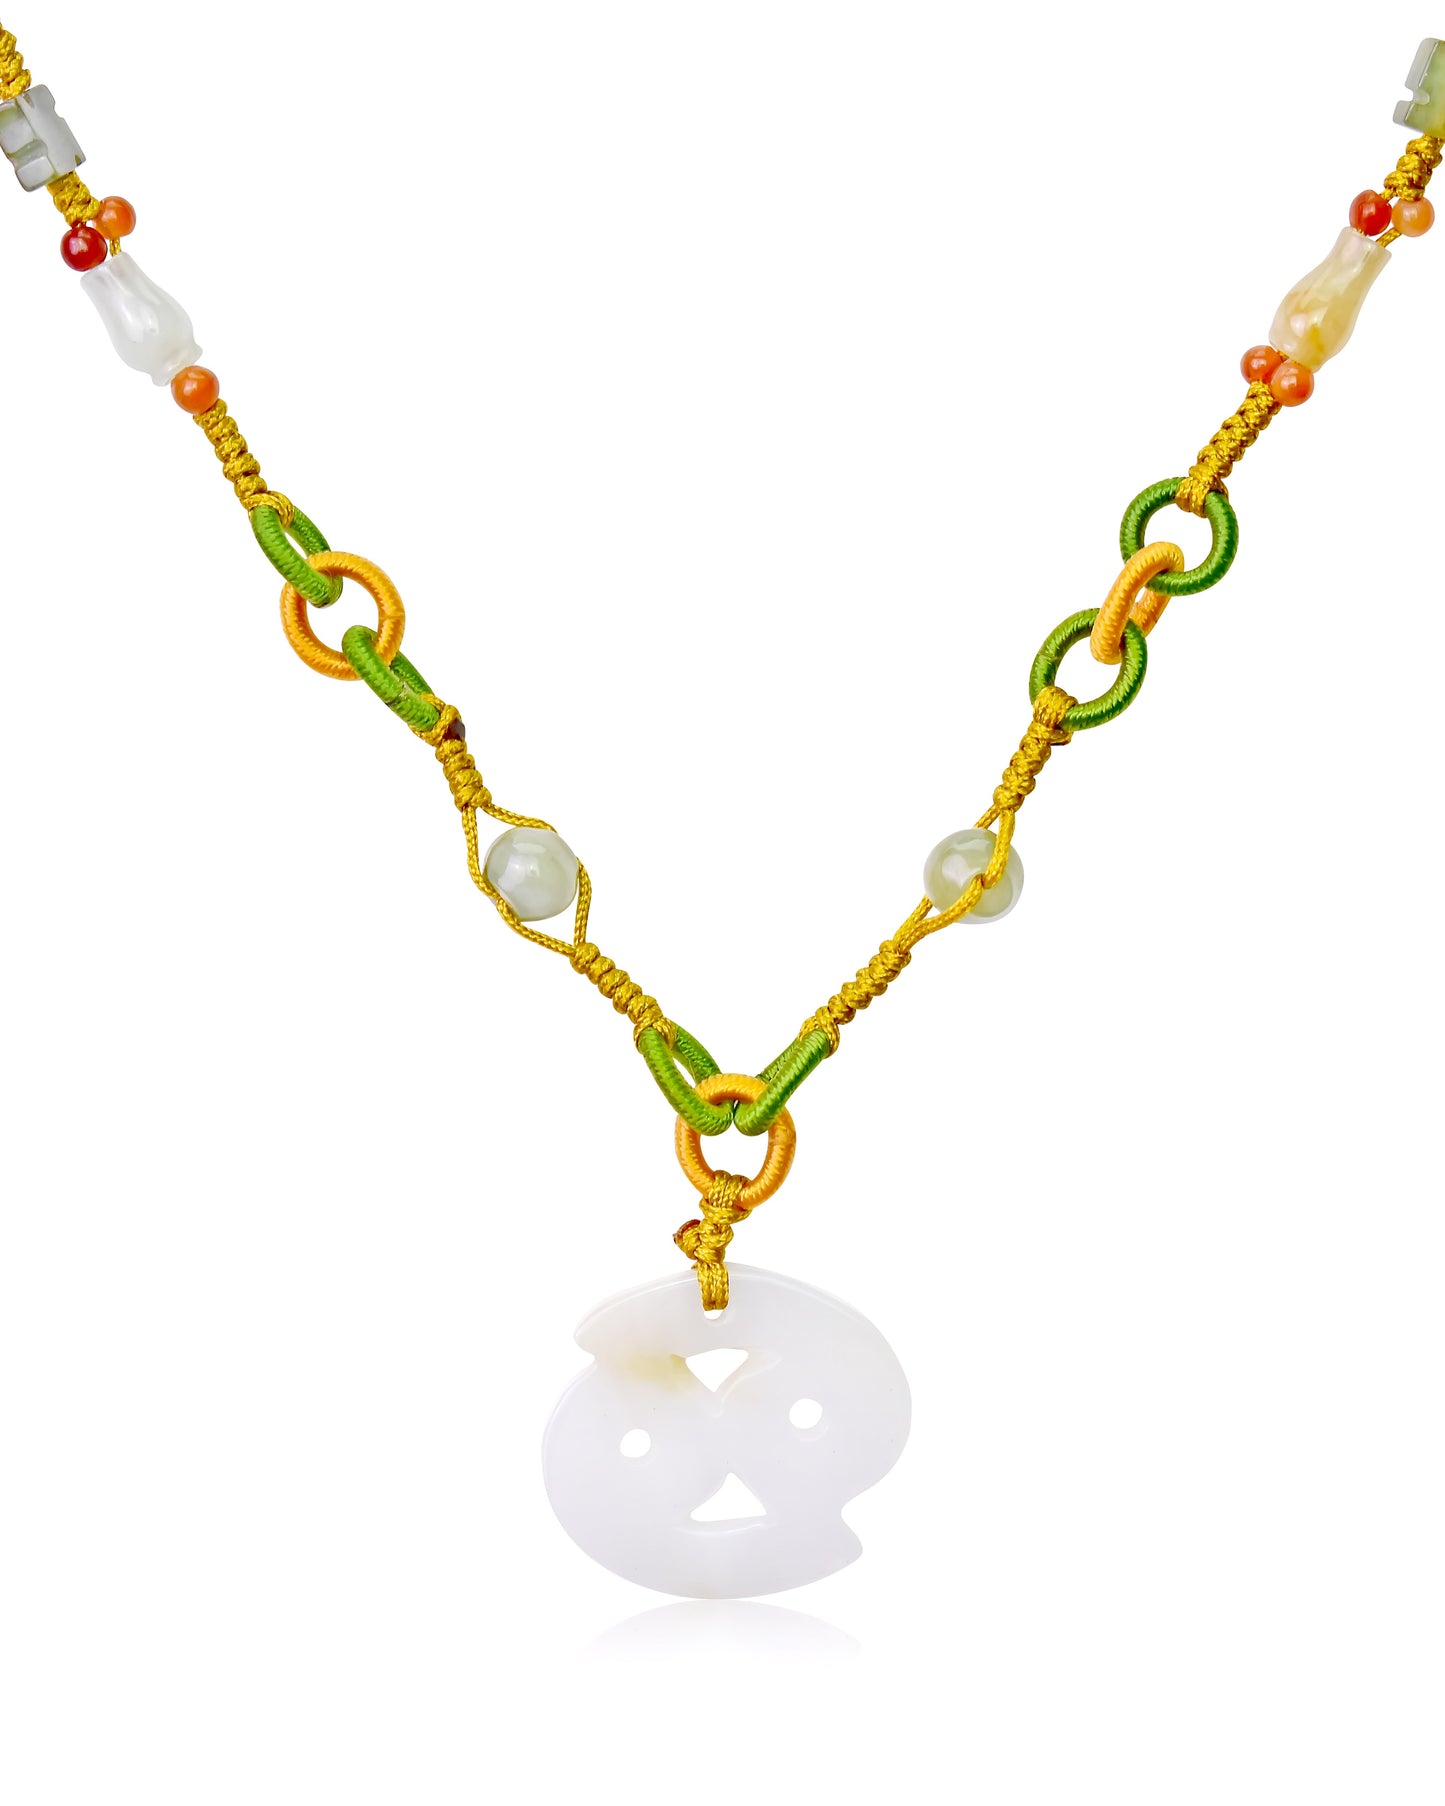 Make a Unique Statement: Cancer Zodiac Sign Jade Pendant Necklace made with Yellow Cord